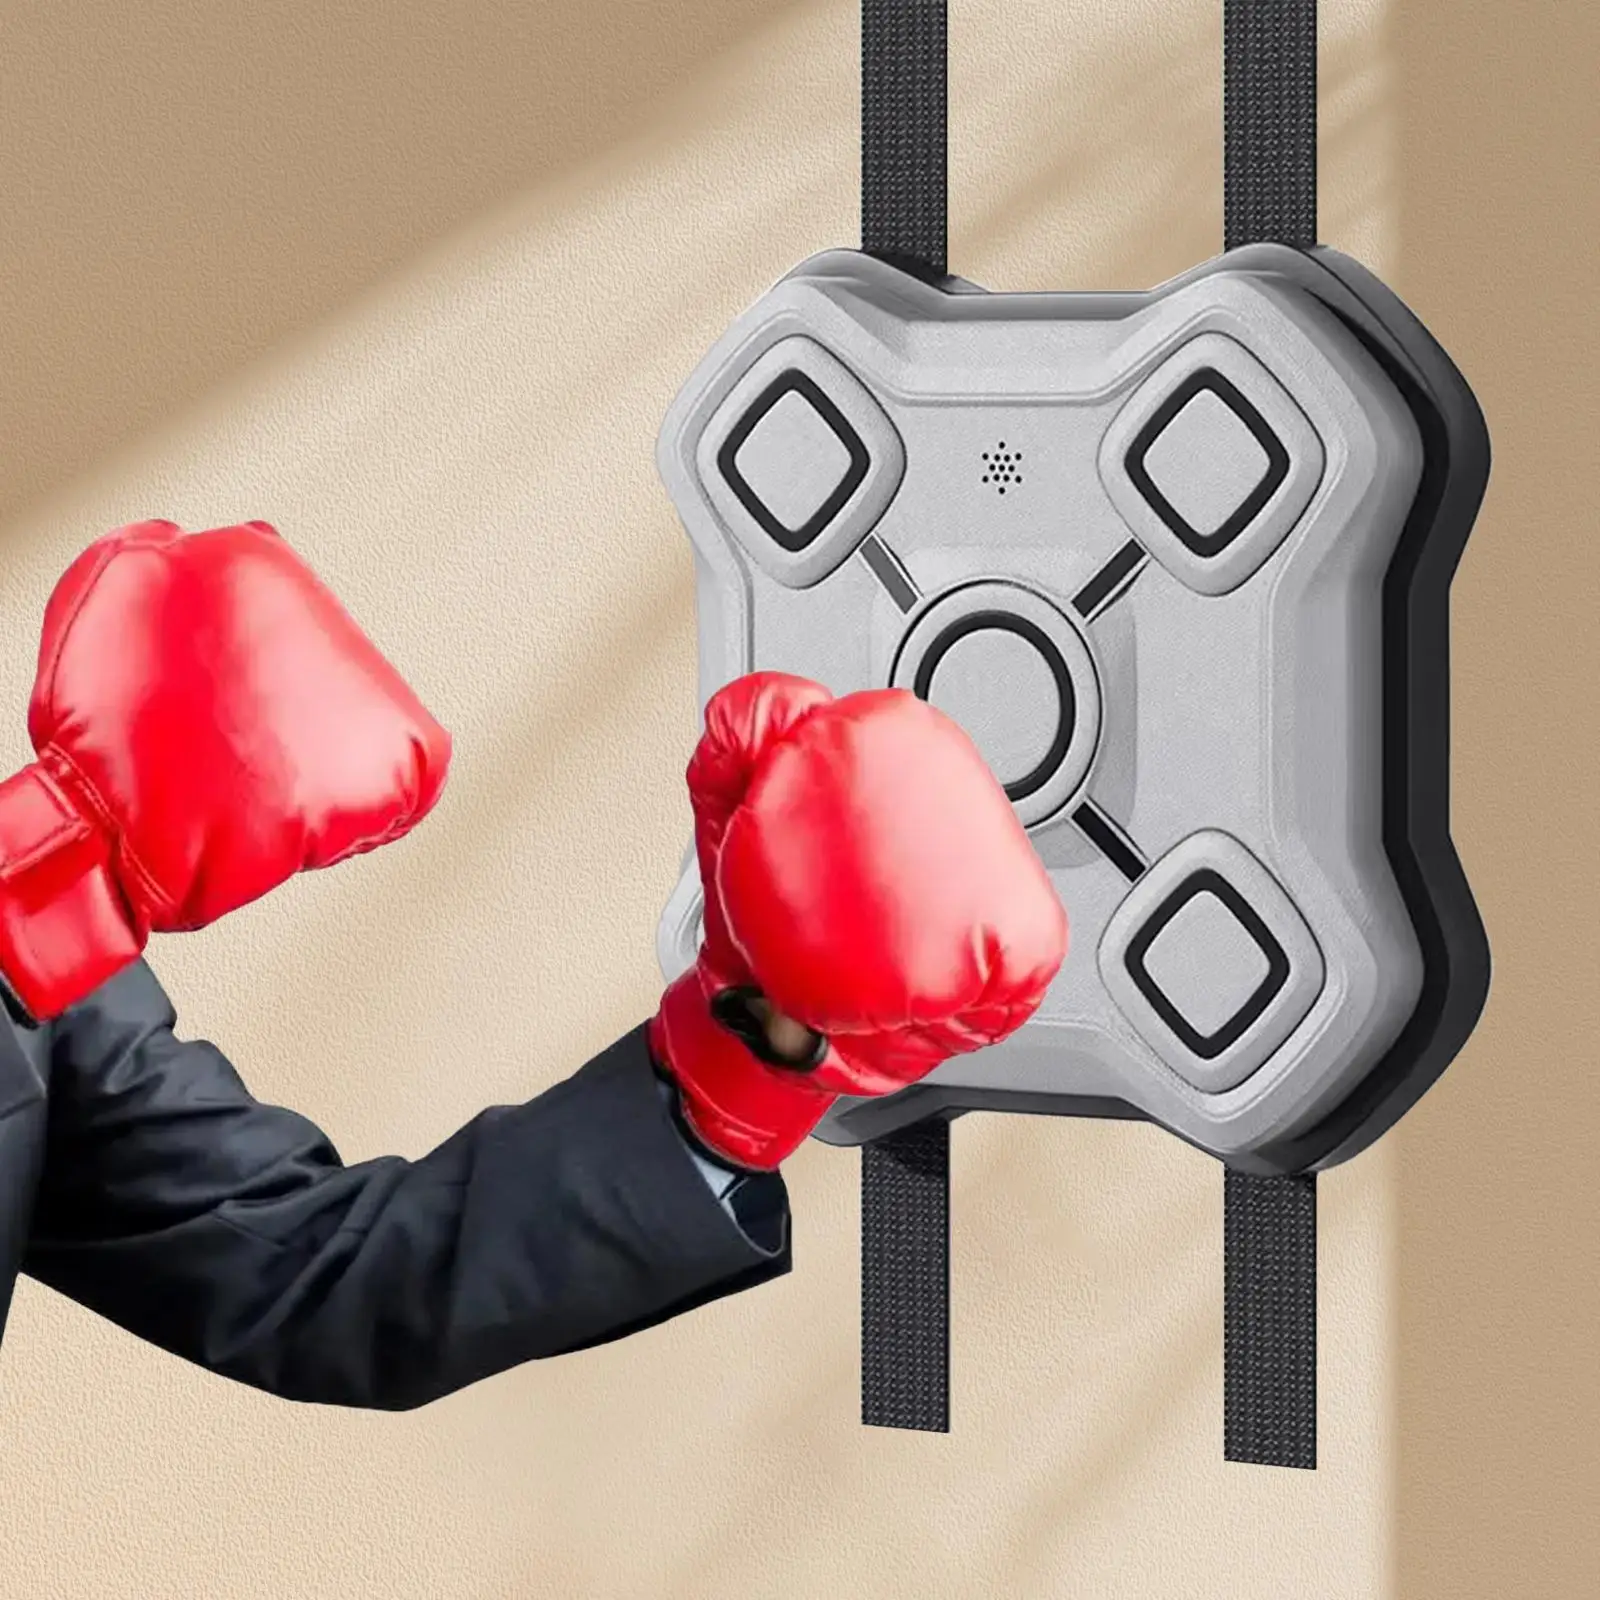 Smart Electronic Wall Target Exercise Competitions Home Music Boxing Machine